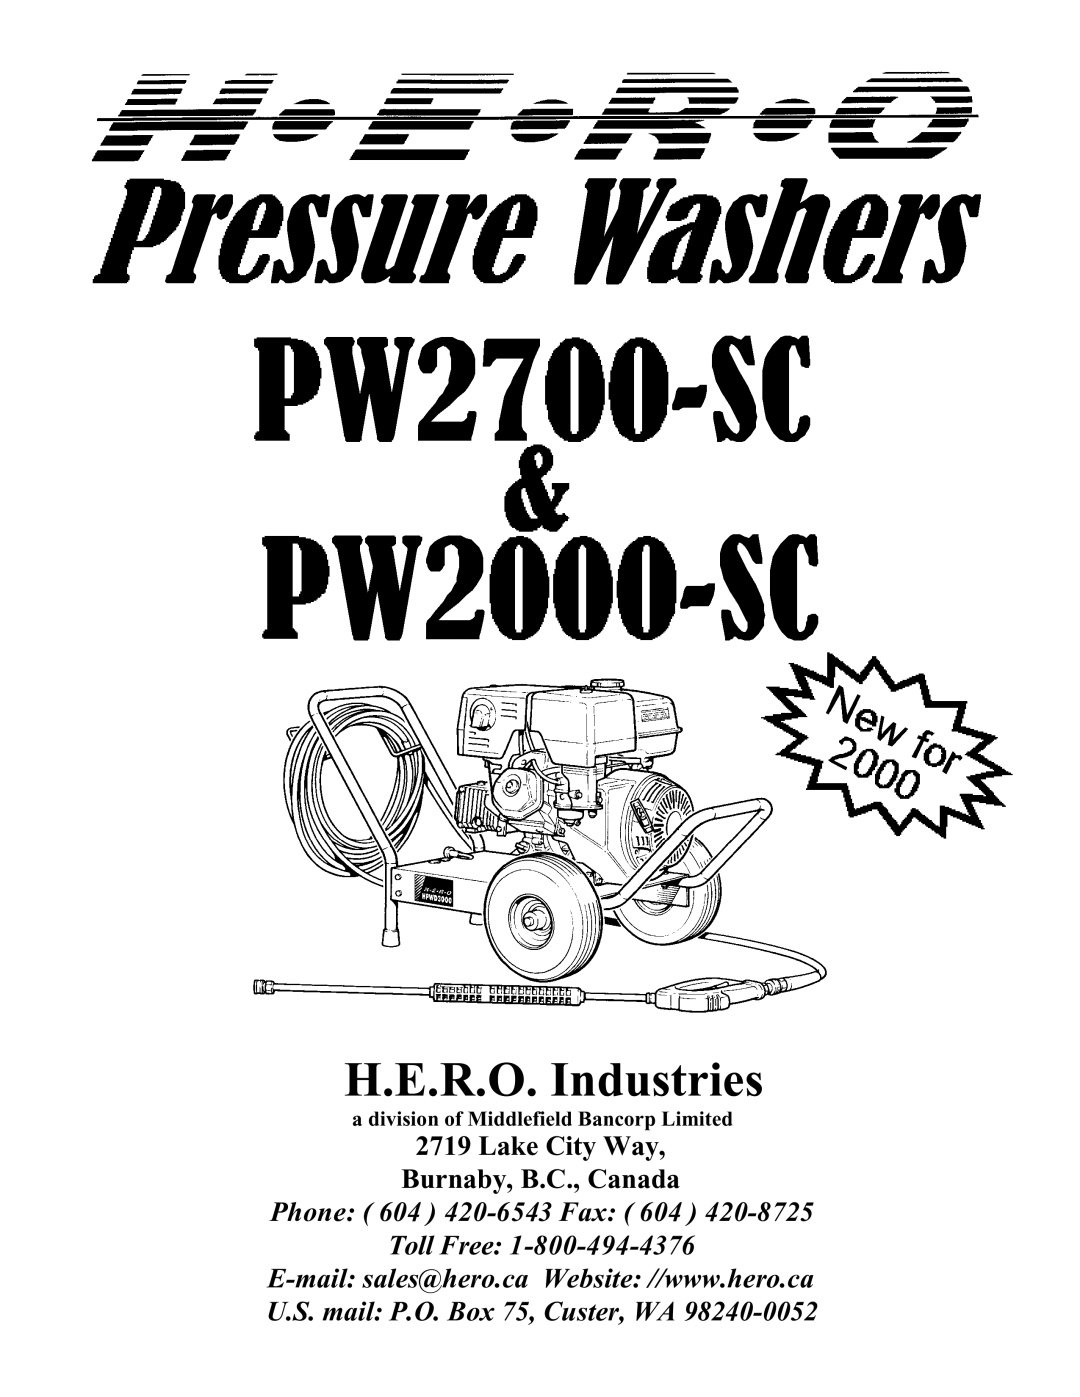 I.C.T.C. Holdings Corporation Pressure Washer owner manual Lake City Way Burnaby, B.C., Canada, H.E.R.O. Industries 